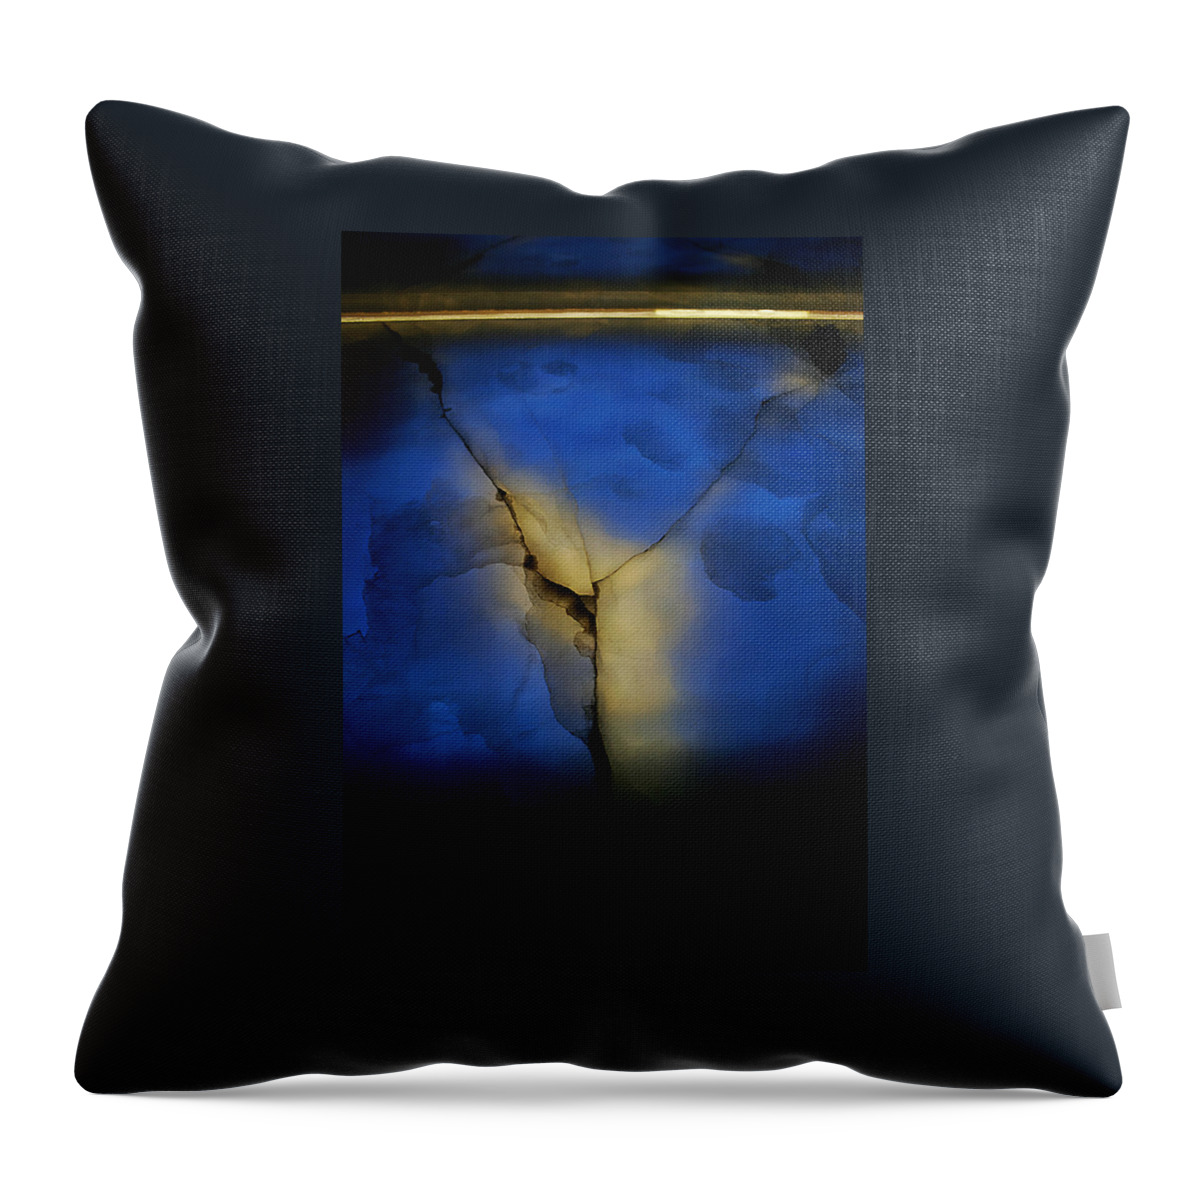 Cracked Throw Pillow featuring the photograph SKC 0243 Cracked Y by Sunil Kapadia